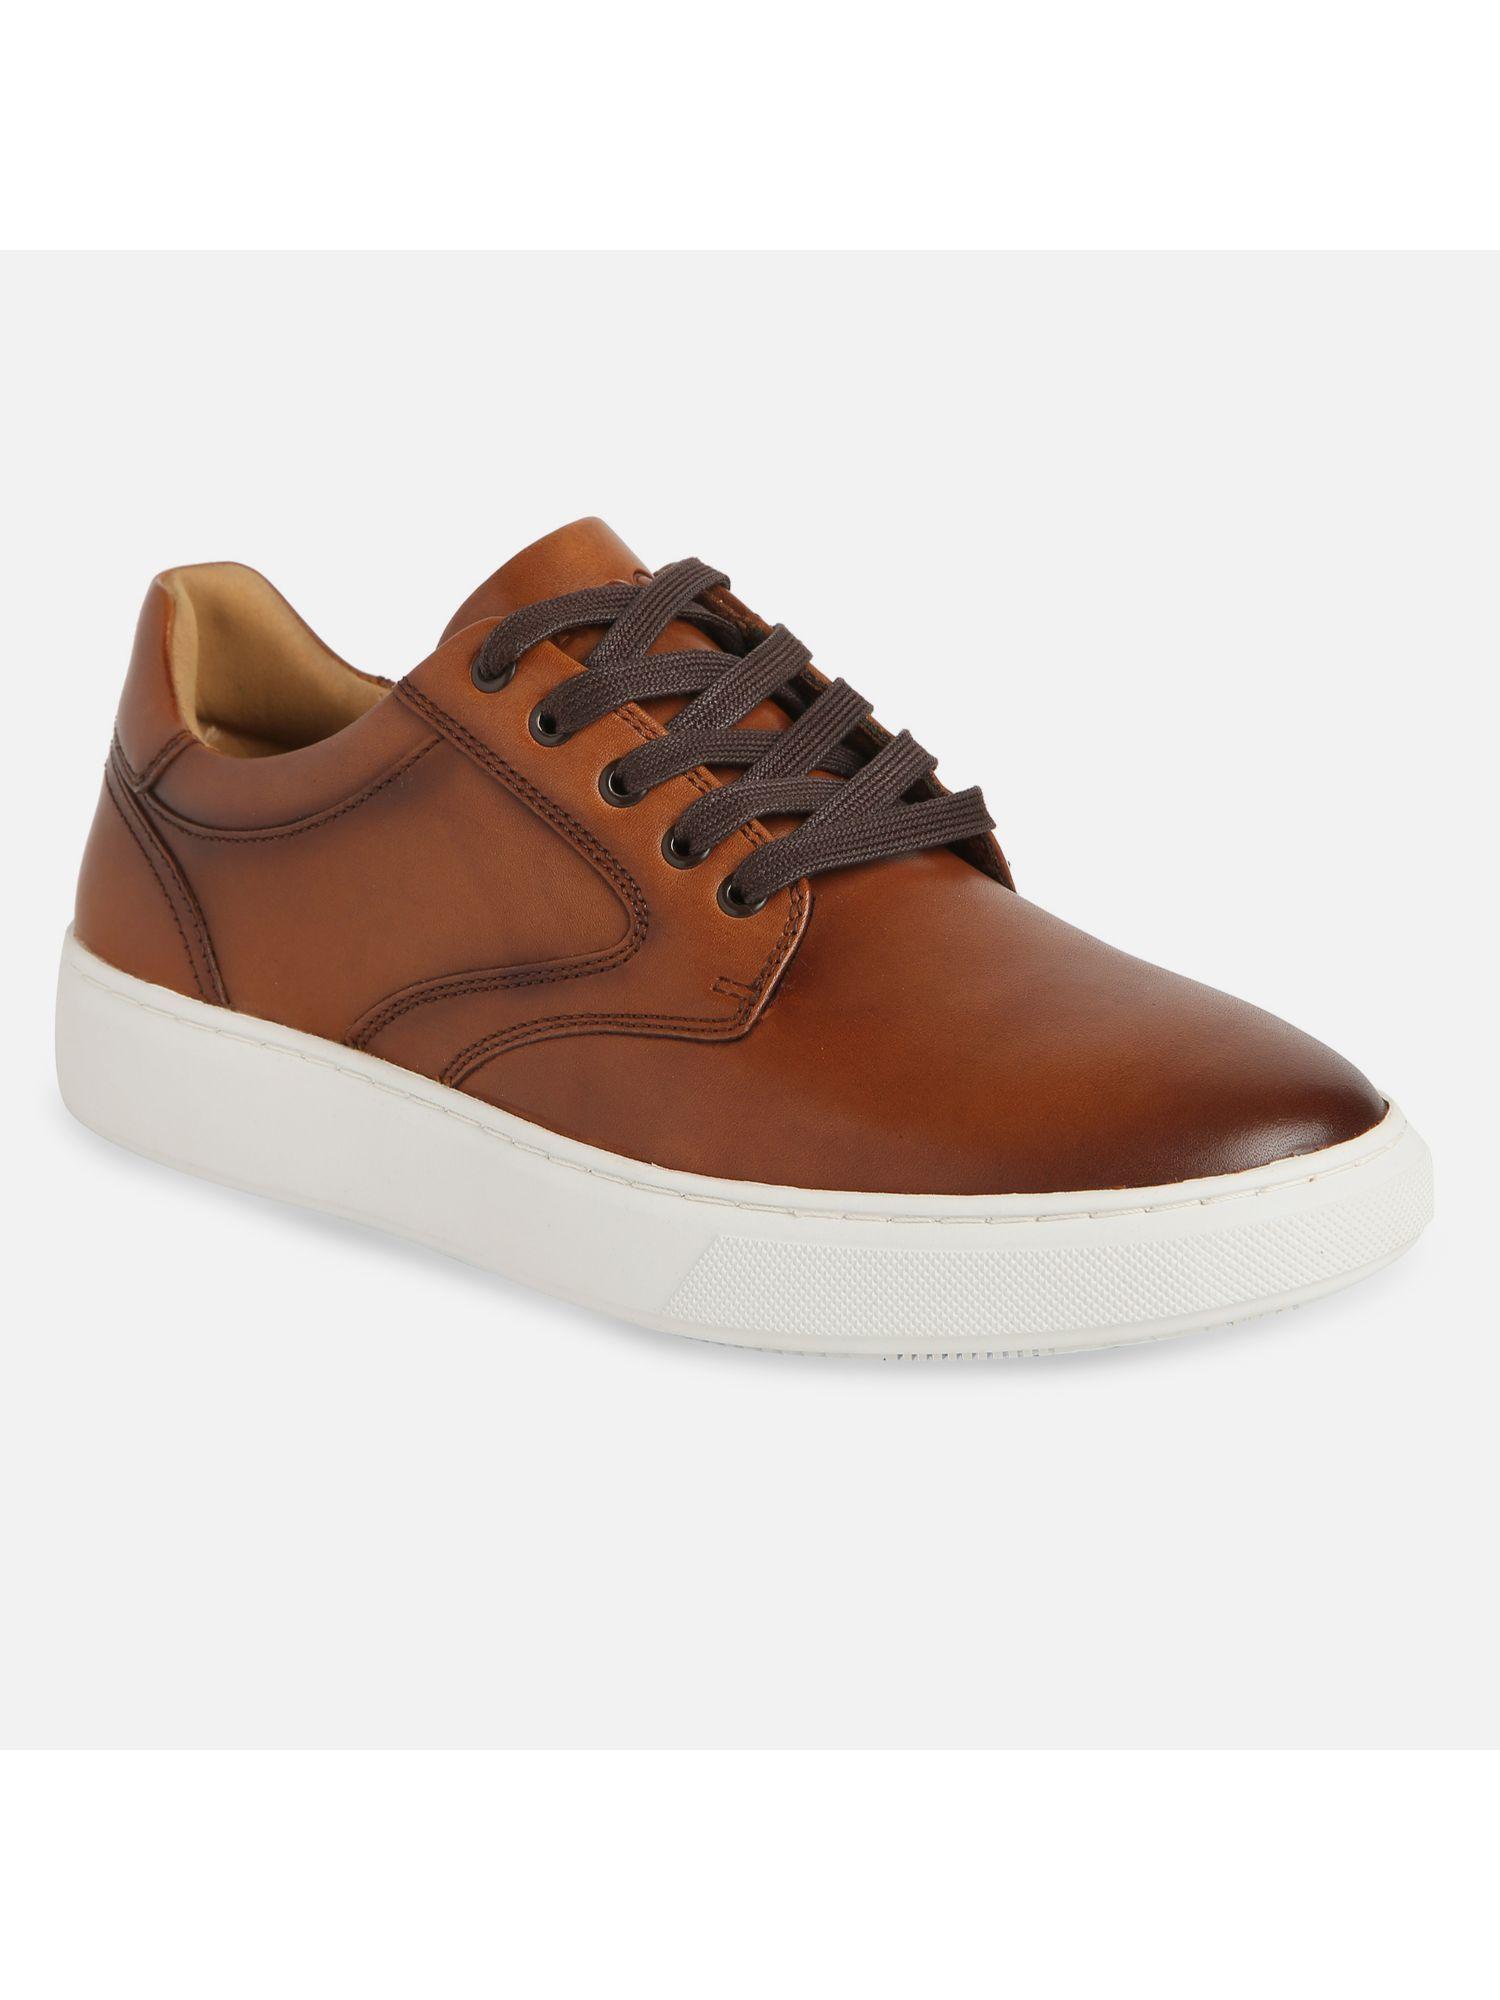 fezz leather tan solid sneakers